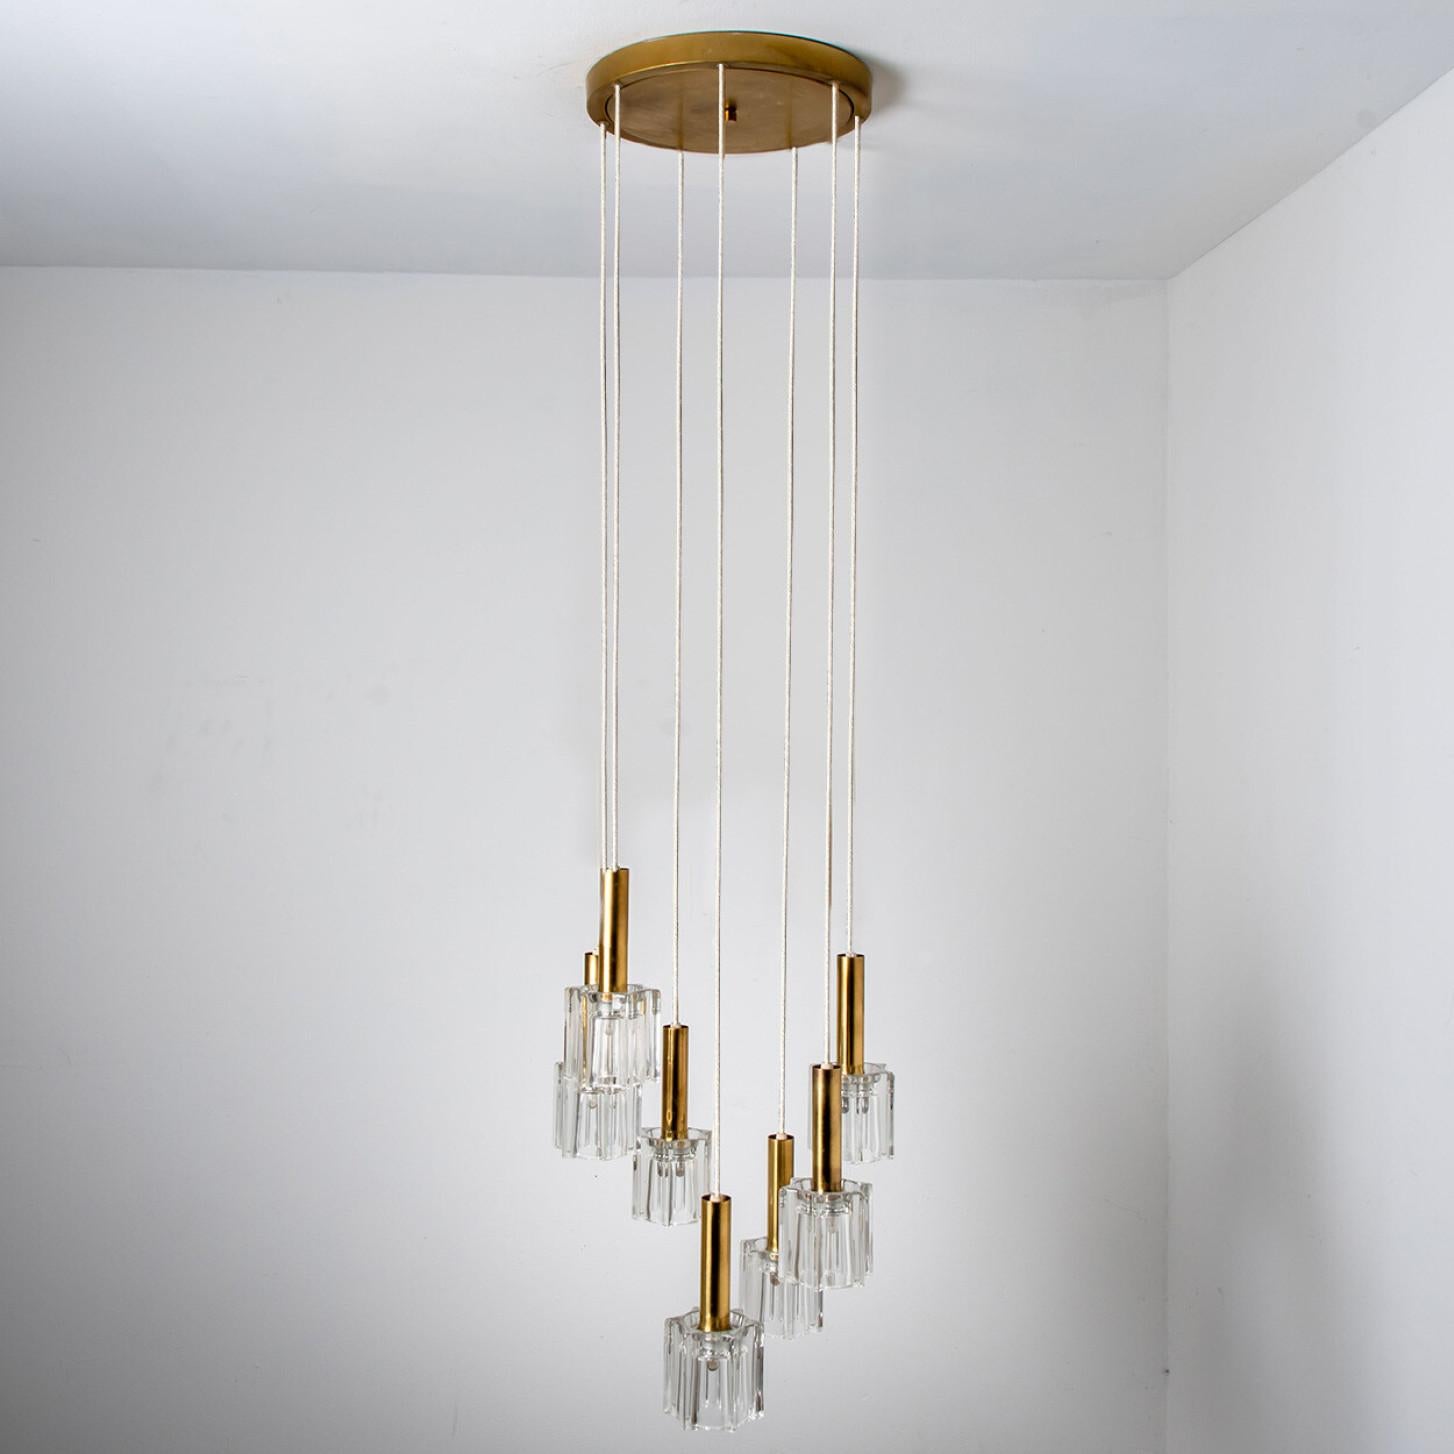 A beautiful and unique clear glass pendant, made in the 1970s by German designer and company Peill Putzler.
The lampshade is made of a clear glass with an brass base, in the shape of a cascade-like spiral. Each light requires 7 E14